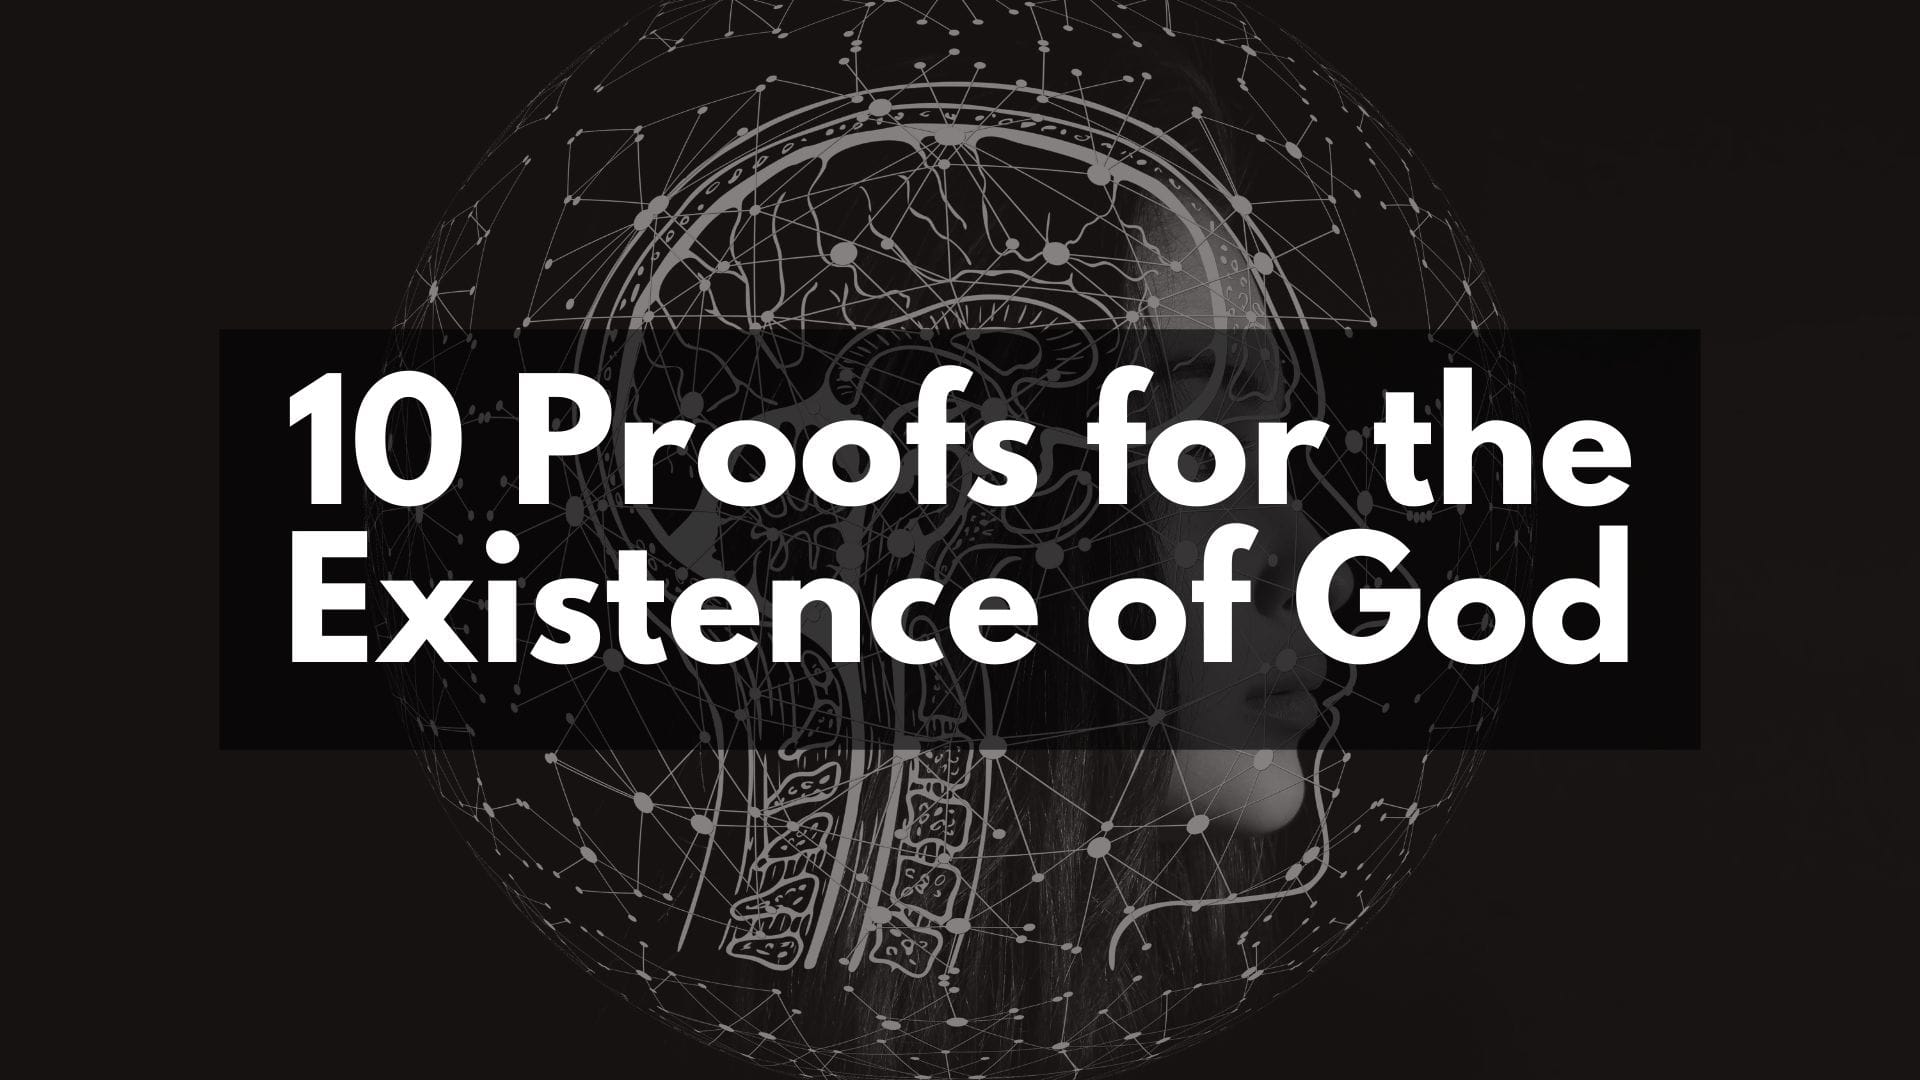 10 Proofs for Existence of God